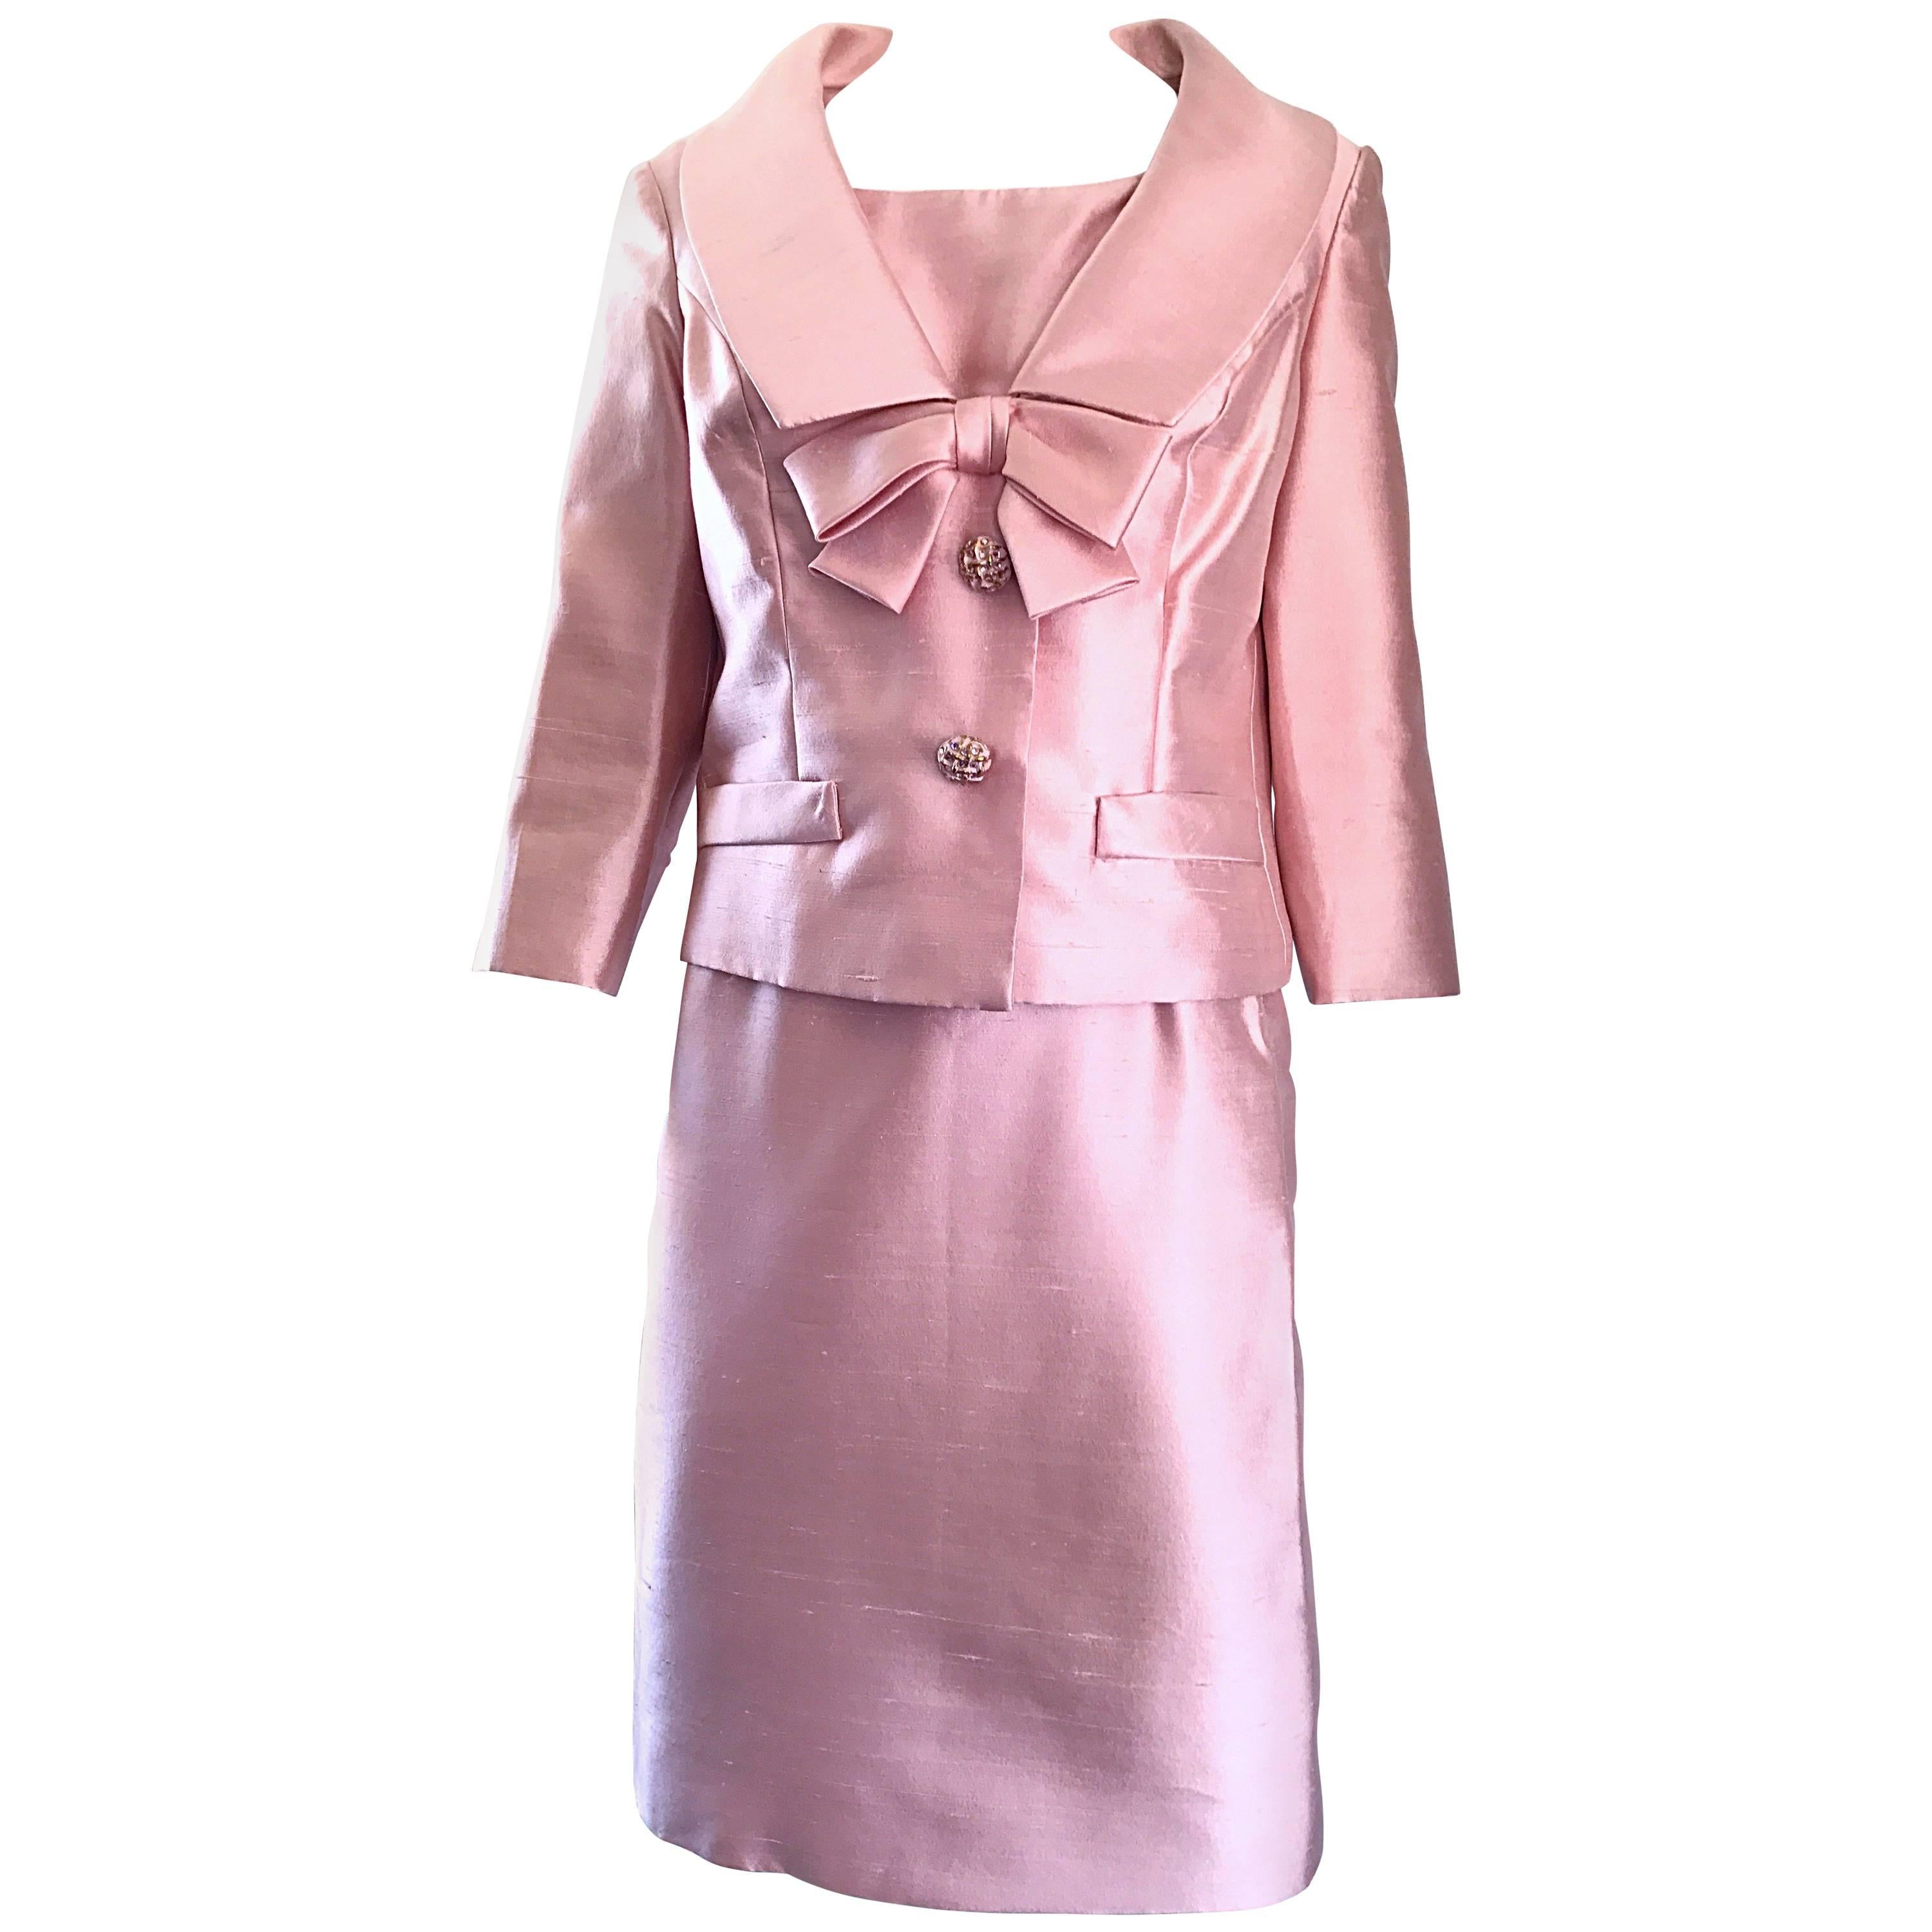 Gorgeous 1960s Demi Couture Pale Pink Silk Shantung Dress and Jacket Ensemble 